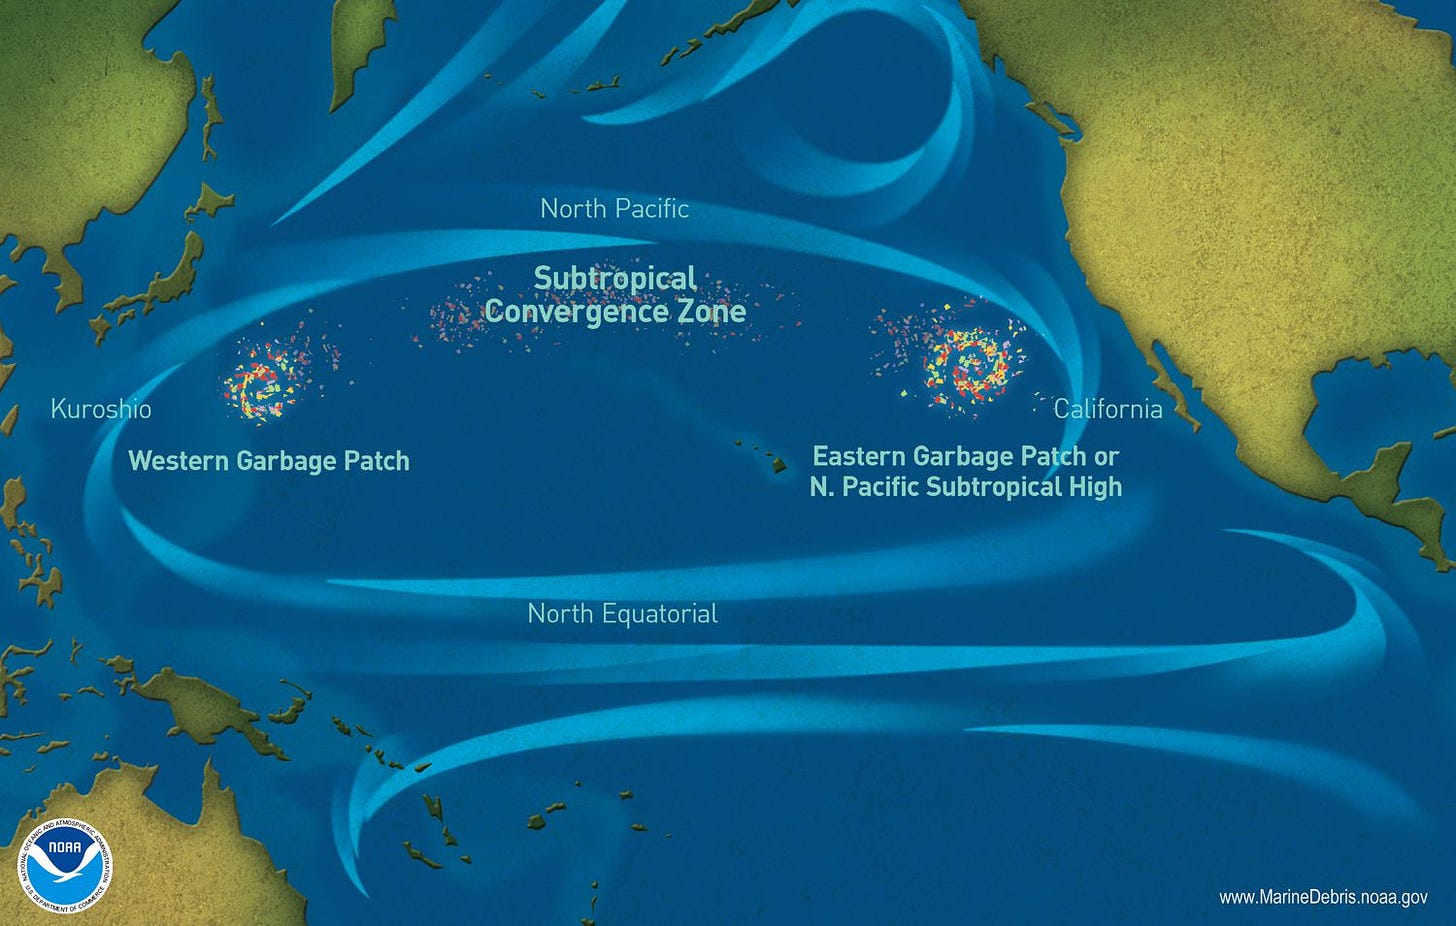 The Great Pacific Garbage Patch is a collection of marine debris in the North Pacific Ocean. Also known as the Pacific trash vortex, the garbage patch is actually two distinct collections of debris bounded by the massive North Pacific Subtropical Gyre.